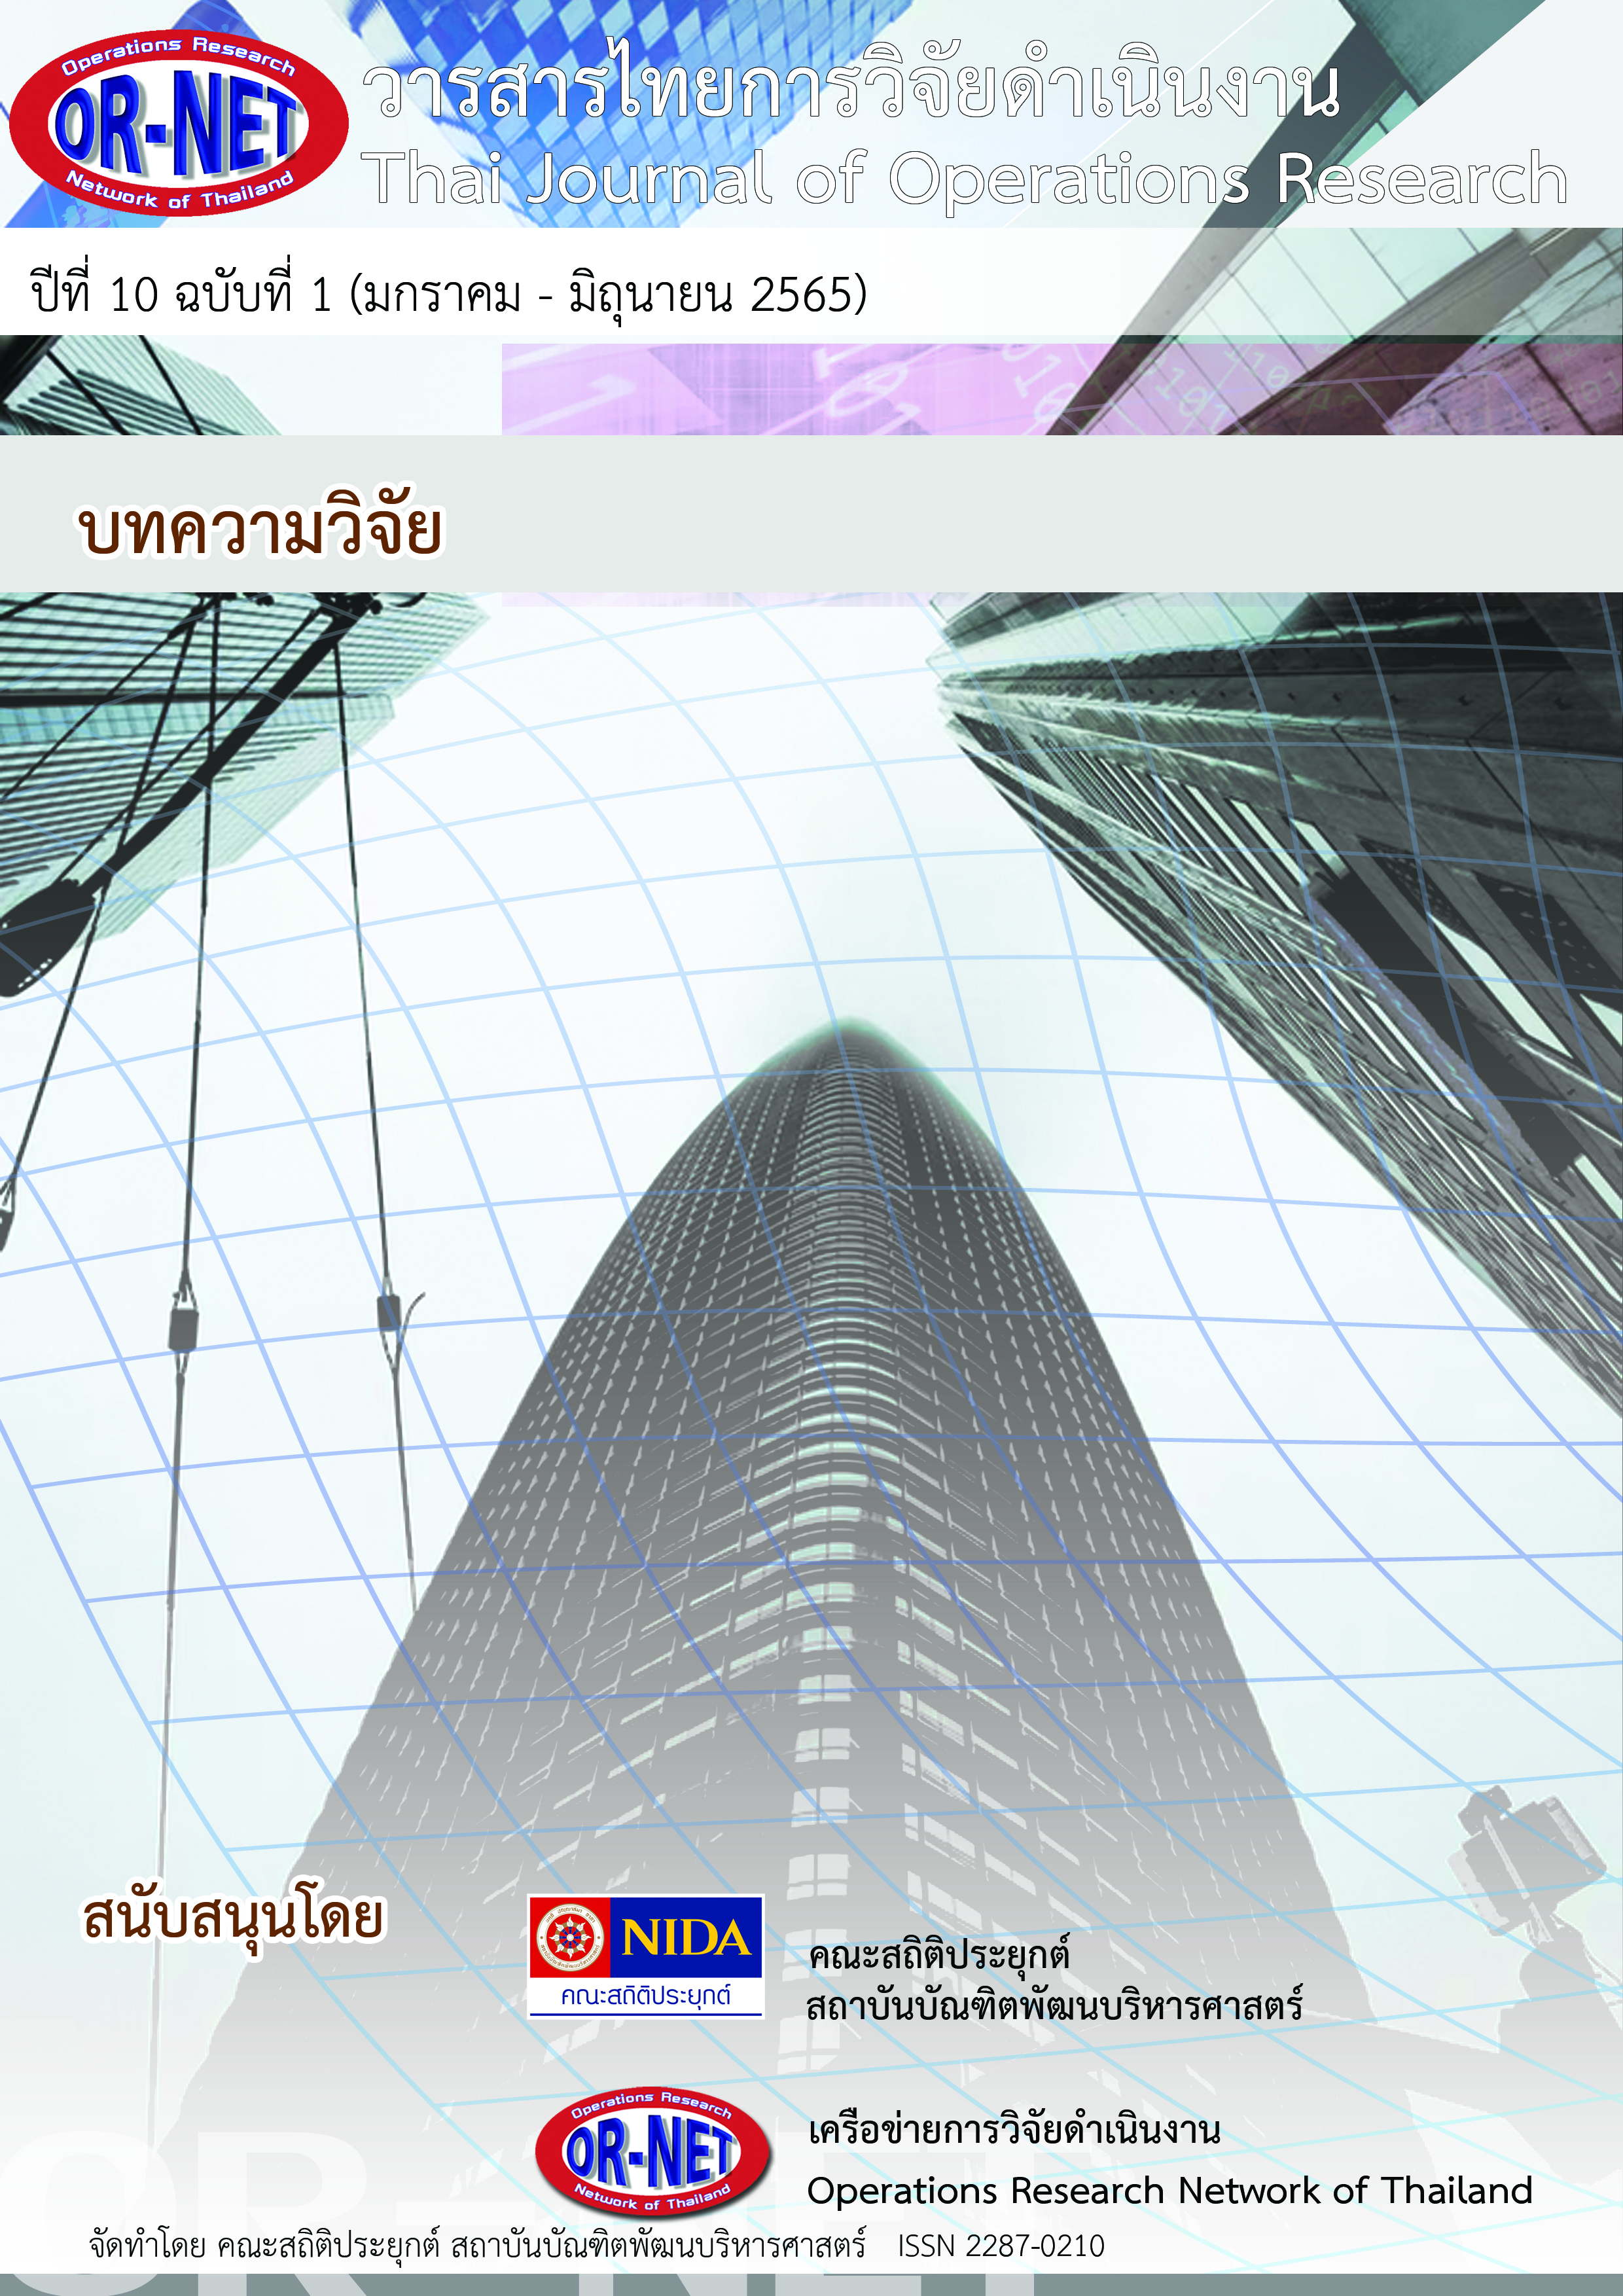 					View Vol. 10 No. 1 (2022): Thai Journal of Operations Research: TJOR Vol 10 No 1 (January - June 2022)
				